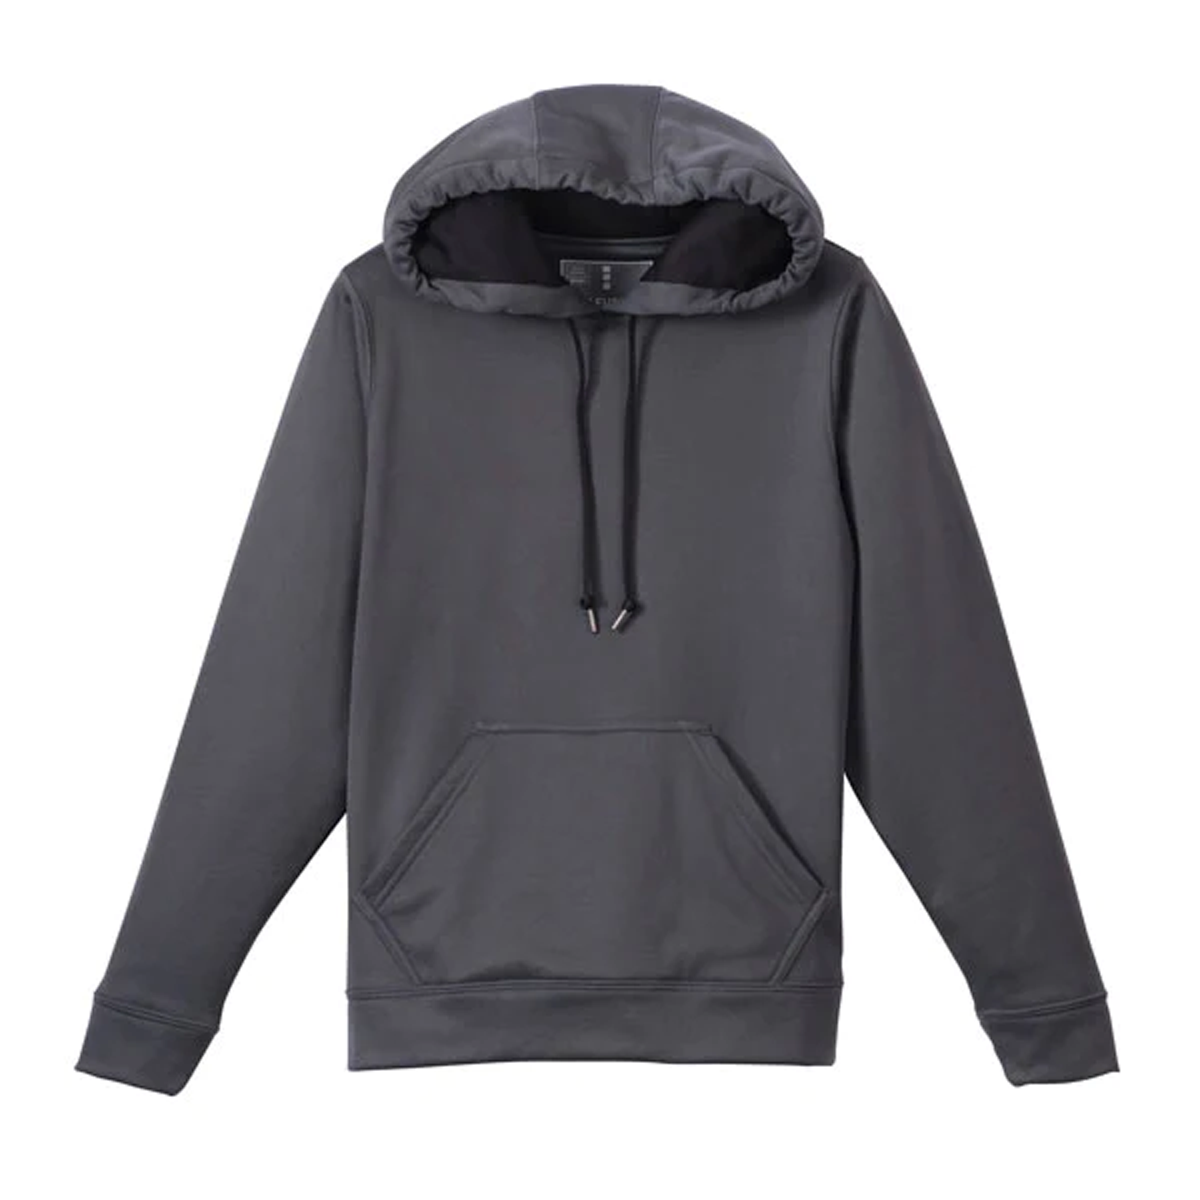 TRIMARK YOUTH PASCO TECH HOODIE